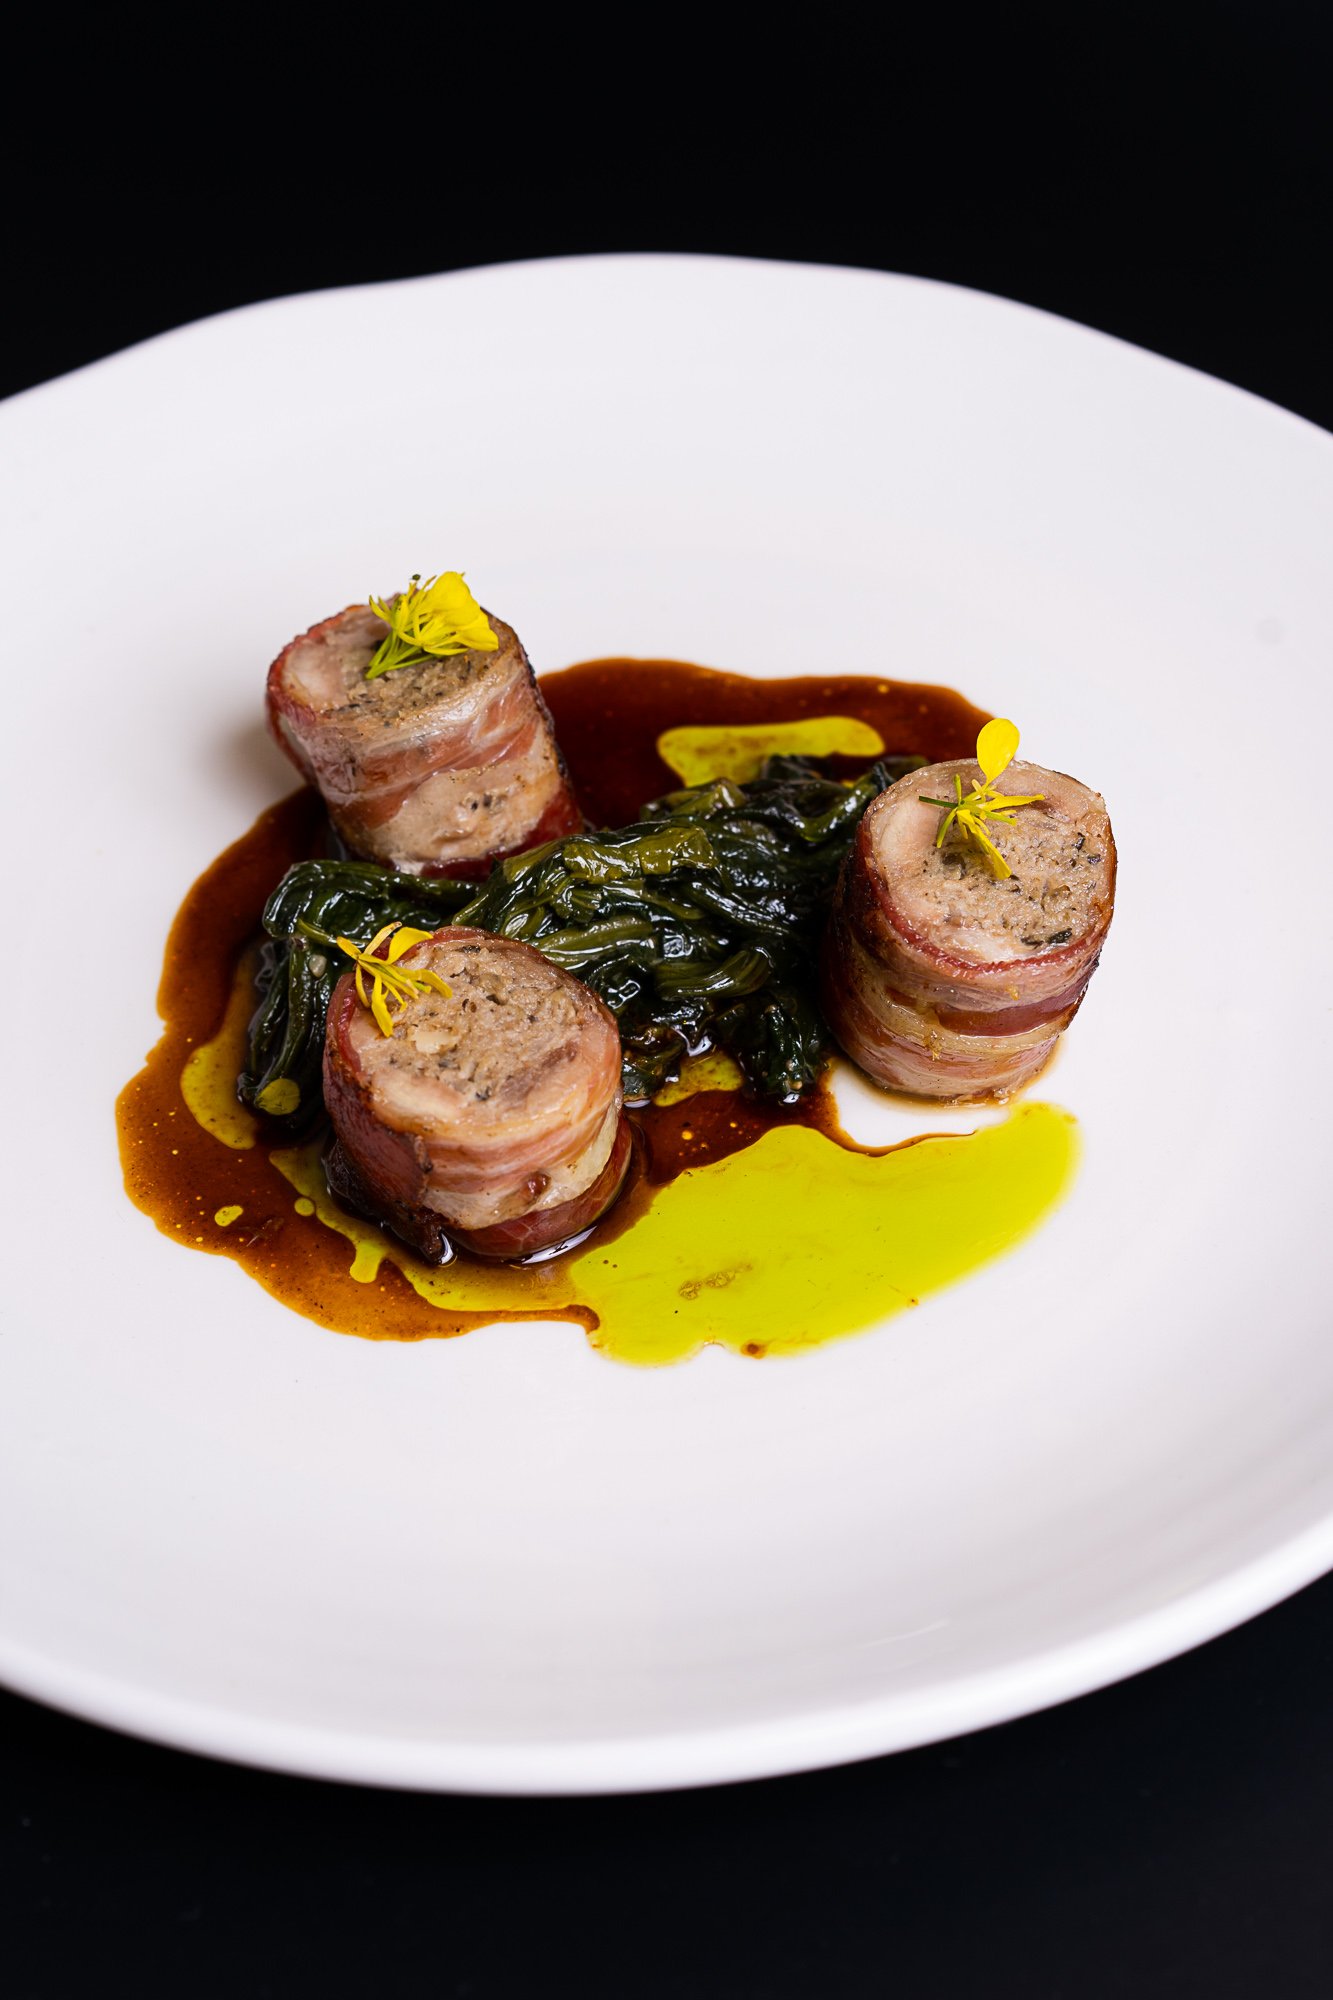 Stuffed quail with braised spinach pine nuts, raisins and jus1.jpg